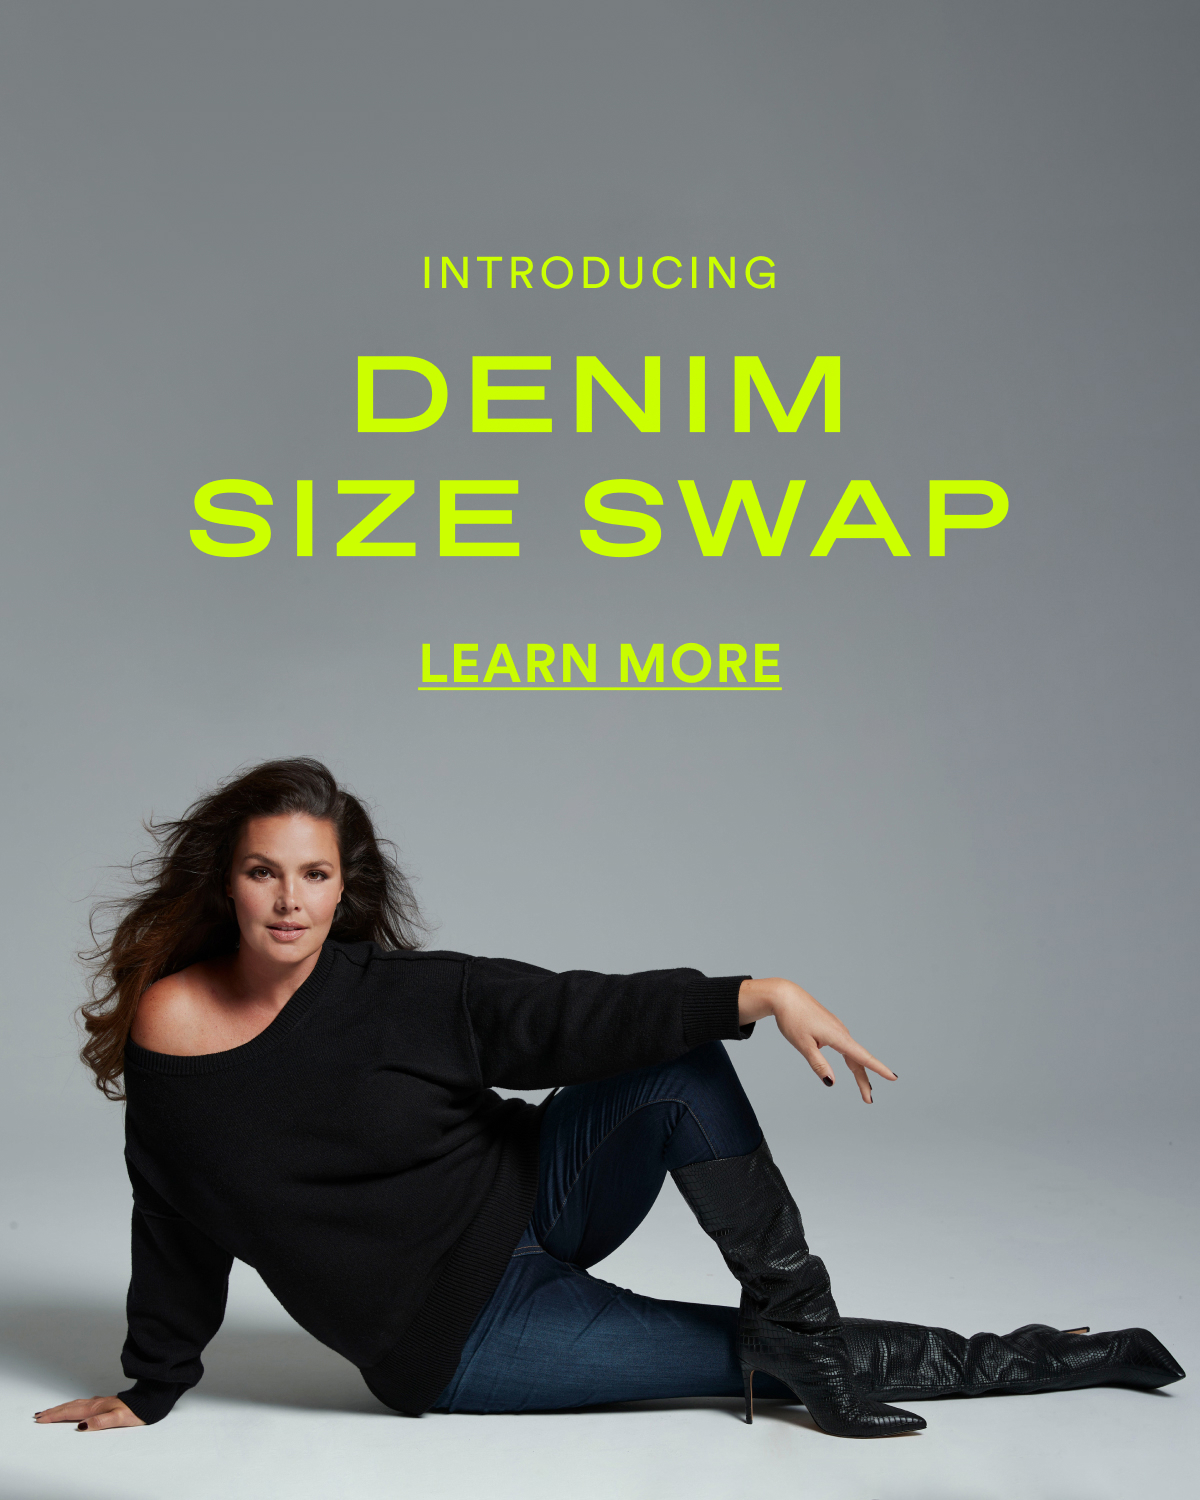 Plus Size Dancing Queen Flared Jeans